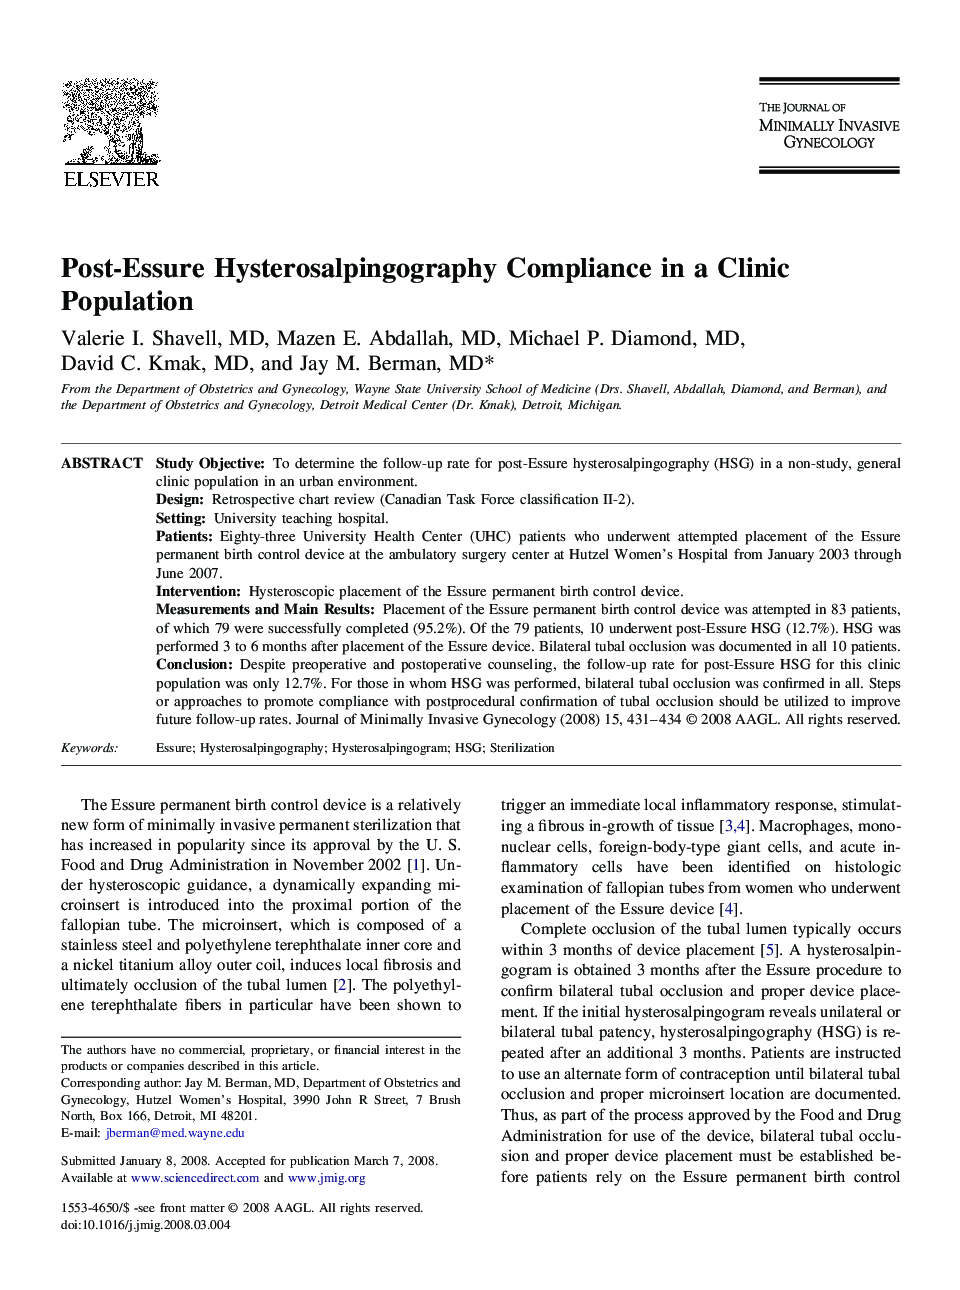 Post-Essure Hysterosalpingography Compliance in a Clinic Population 